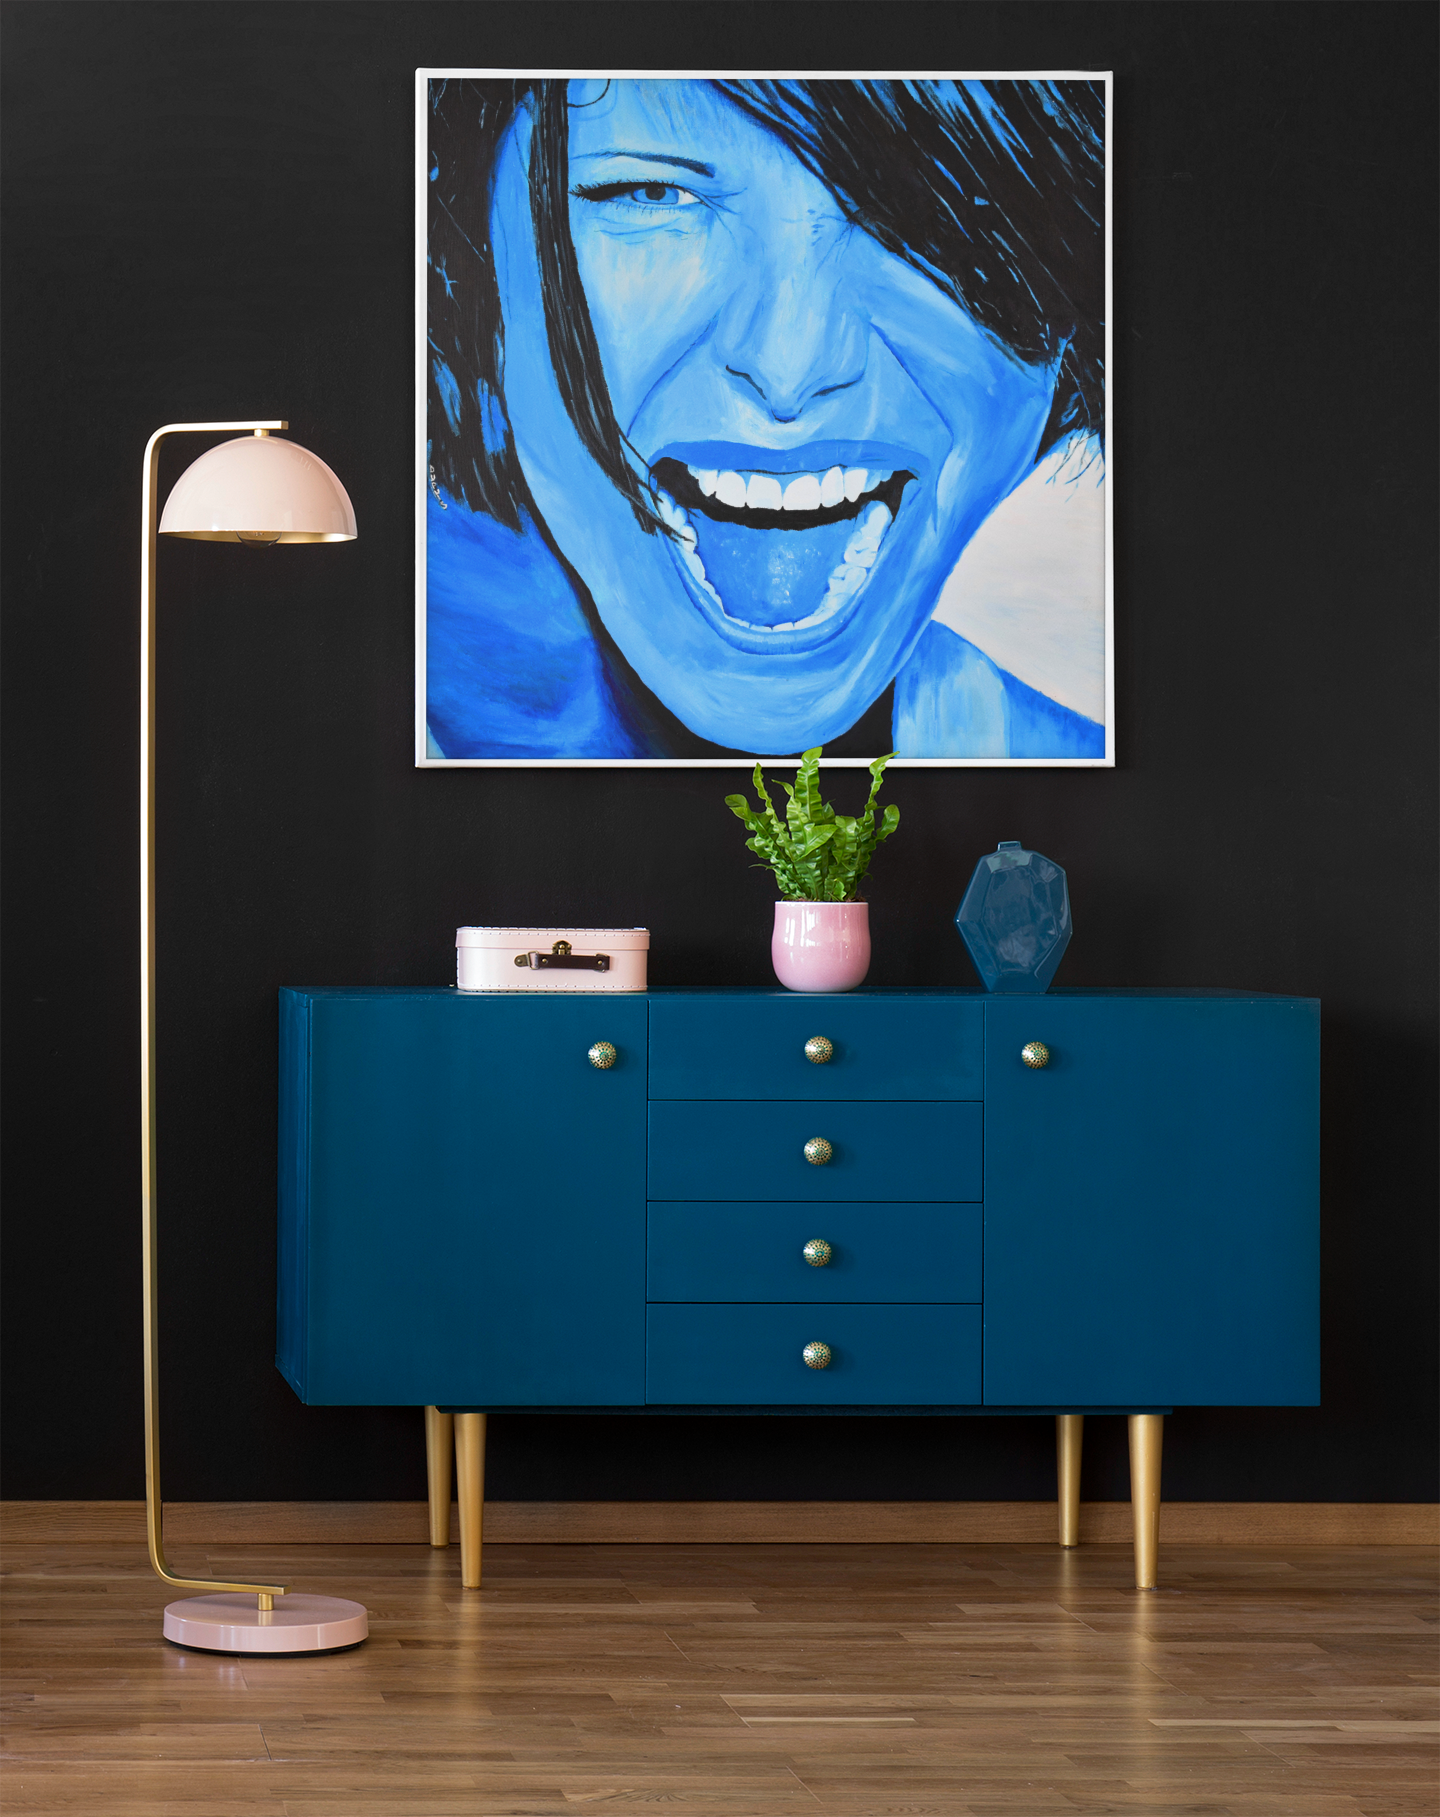 A bright blue giclee art print of a passionate woman showing emotions, woman portrait art, hanging on a wall over a cabinet next to a lamp